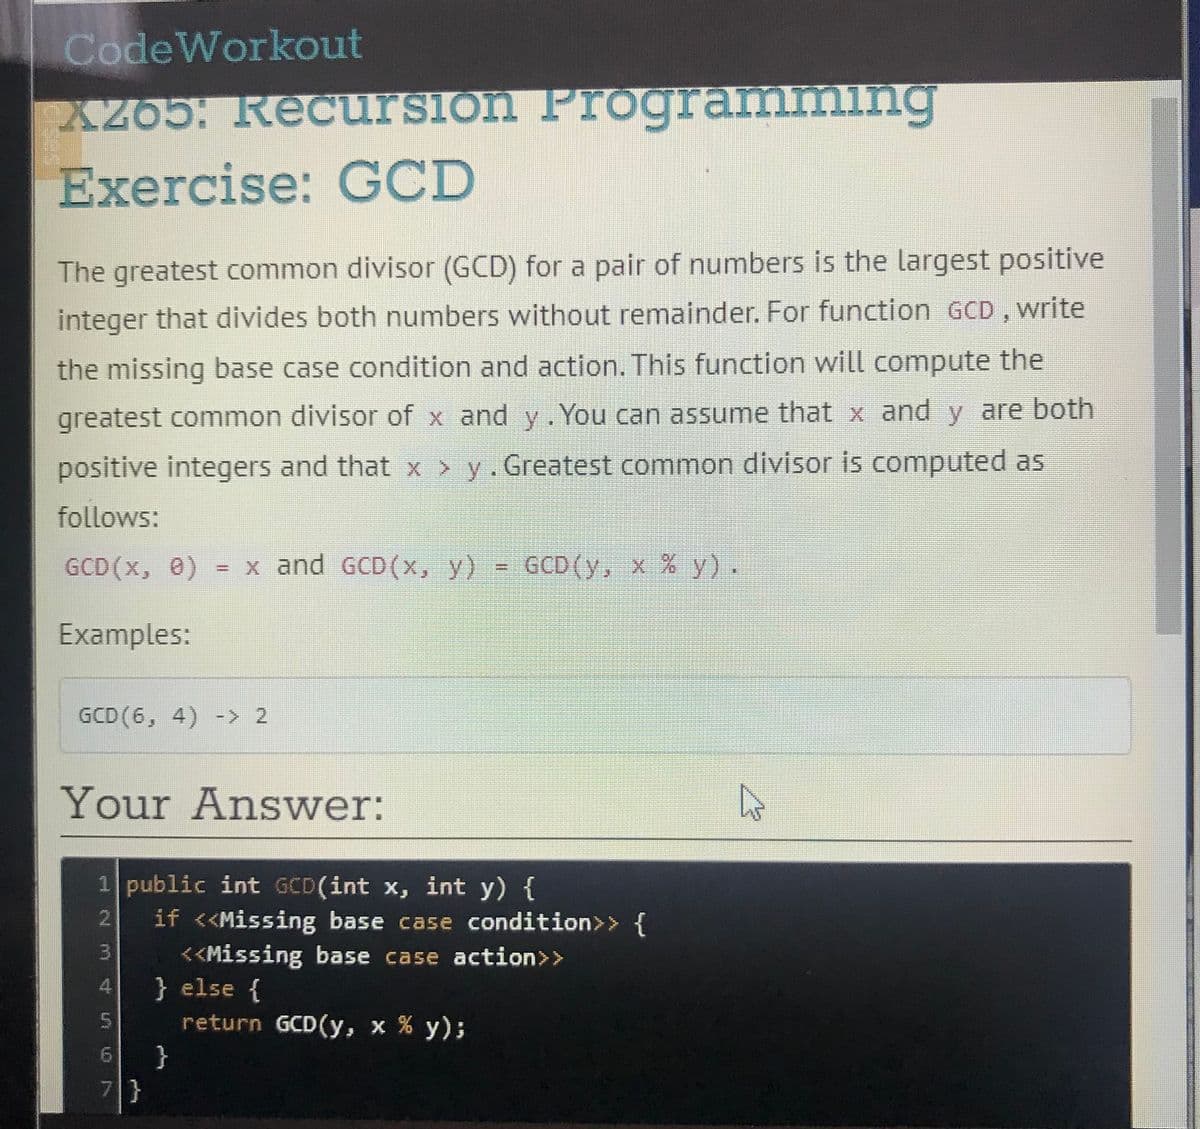 CodeWorkout
XZ65. Recursion Programming
Exercise: GCD
The greatest common divisor (GCD) for a pair of numbers is the largest positive
integer that divides both numbers without remainder. For function GCD , write
the missing base case condition and action. This function will compute the
greatest common divisor of x and y. You can assume that x and y are both
positive integers and that x > y. Greatest common divisor is computed as
follows:
GCD (x, 0)
= x and GCD(x, y) = GCD(y, x % y).
%3D
Examples:
GCD(6, 4) -> 2
Your Answer:
1 public int GCD(int x, int y) {
if <<Missing base case condition>> {
<<Missing base case action>>
} else {
return GCD(y, x % y);
2.
4.
5.
